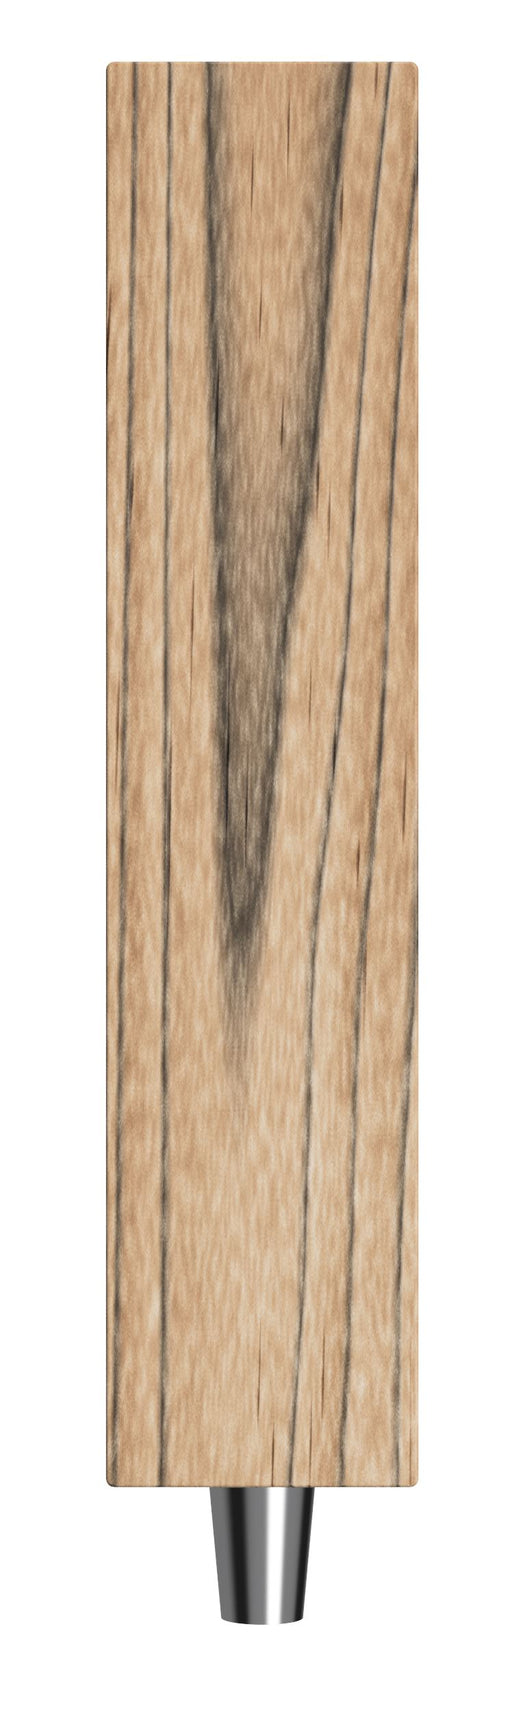 Copy of Copy of Wooden tap handle rectangle flame Tap Handles Steel City Tap 